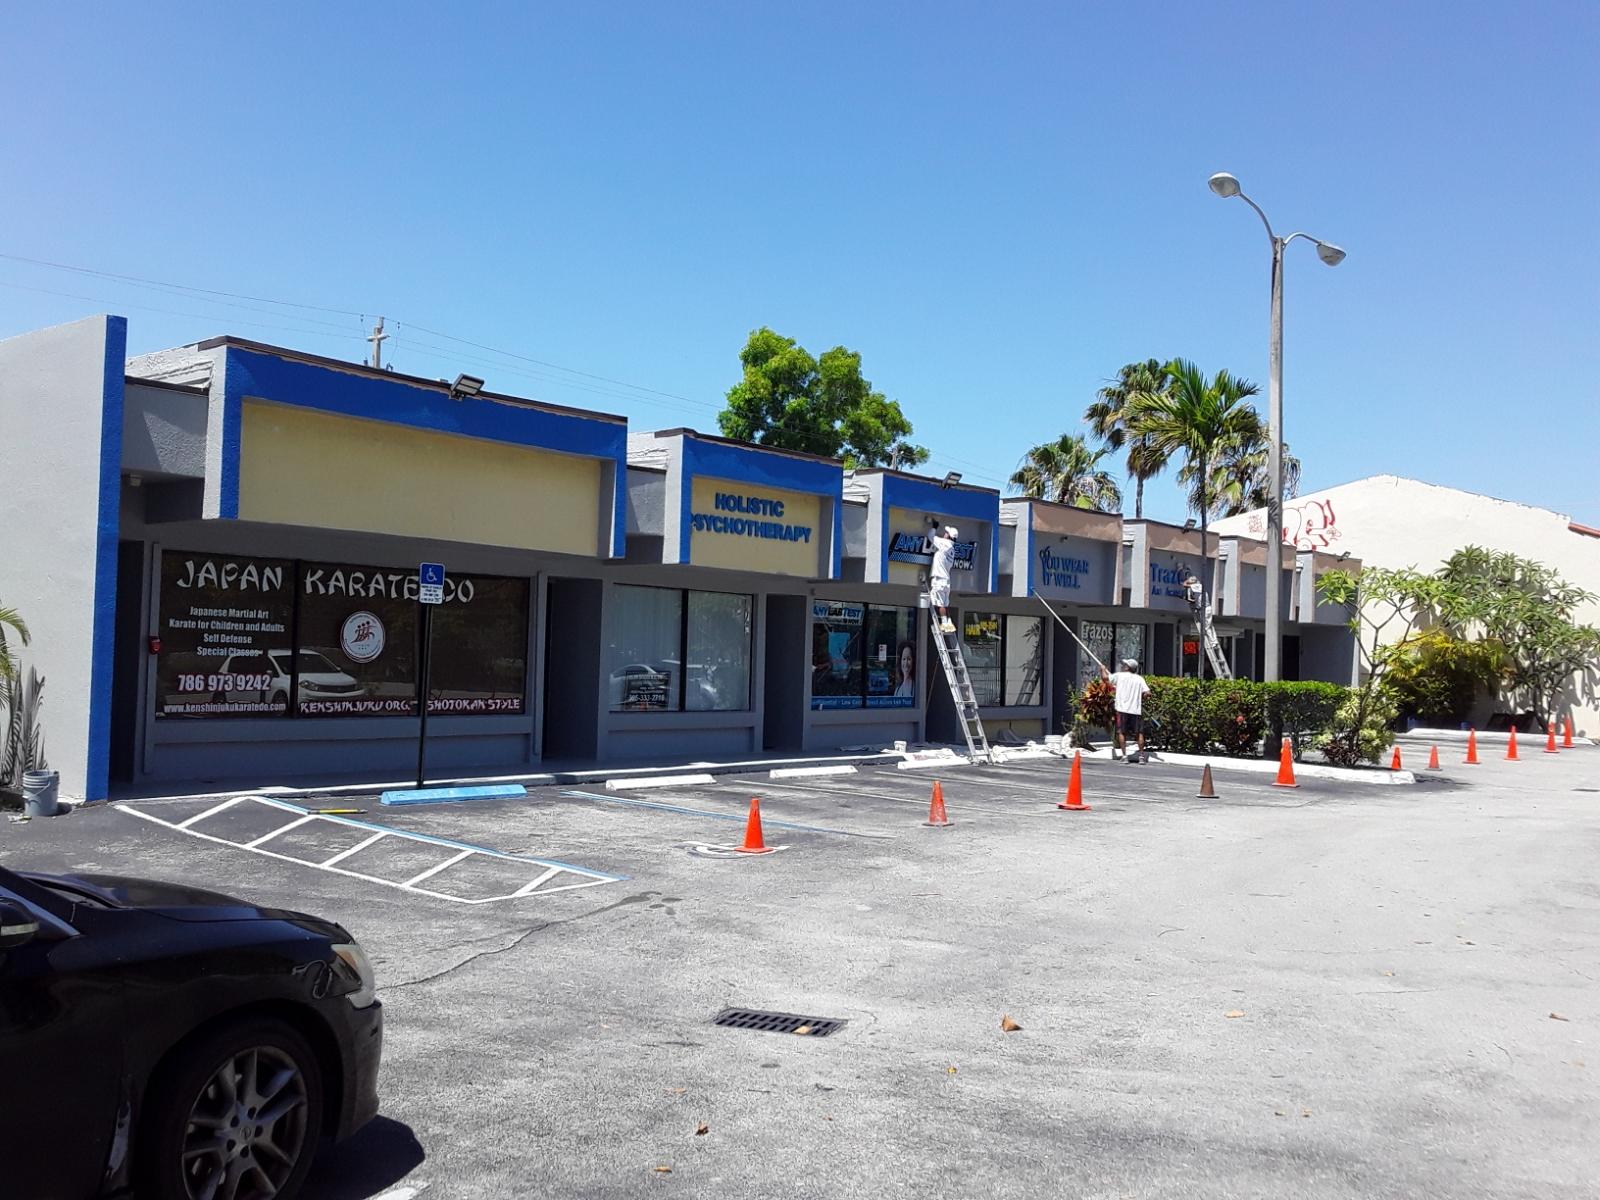 Shopping strip - commercial painting - Hollywood,FL.